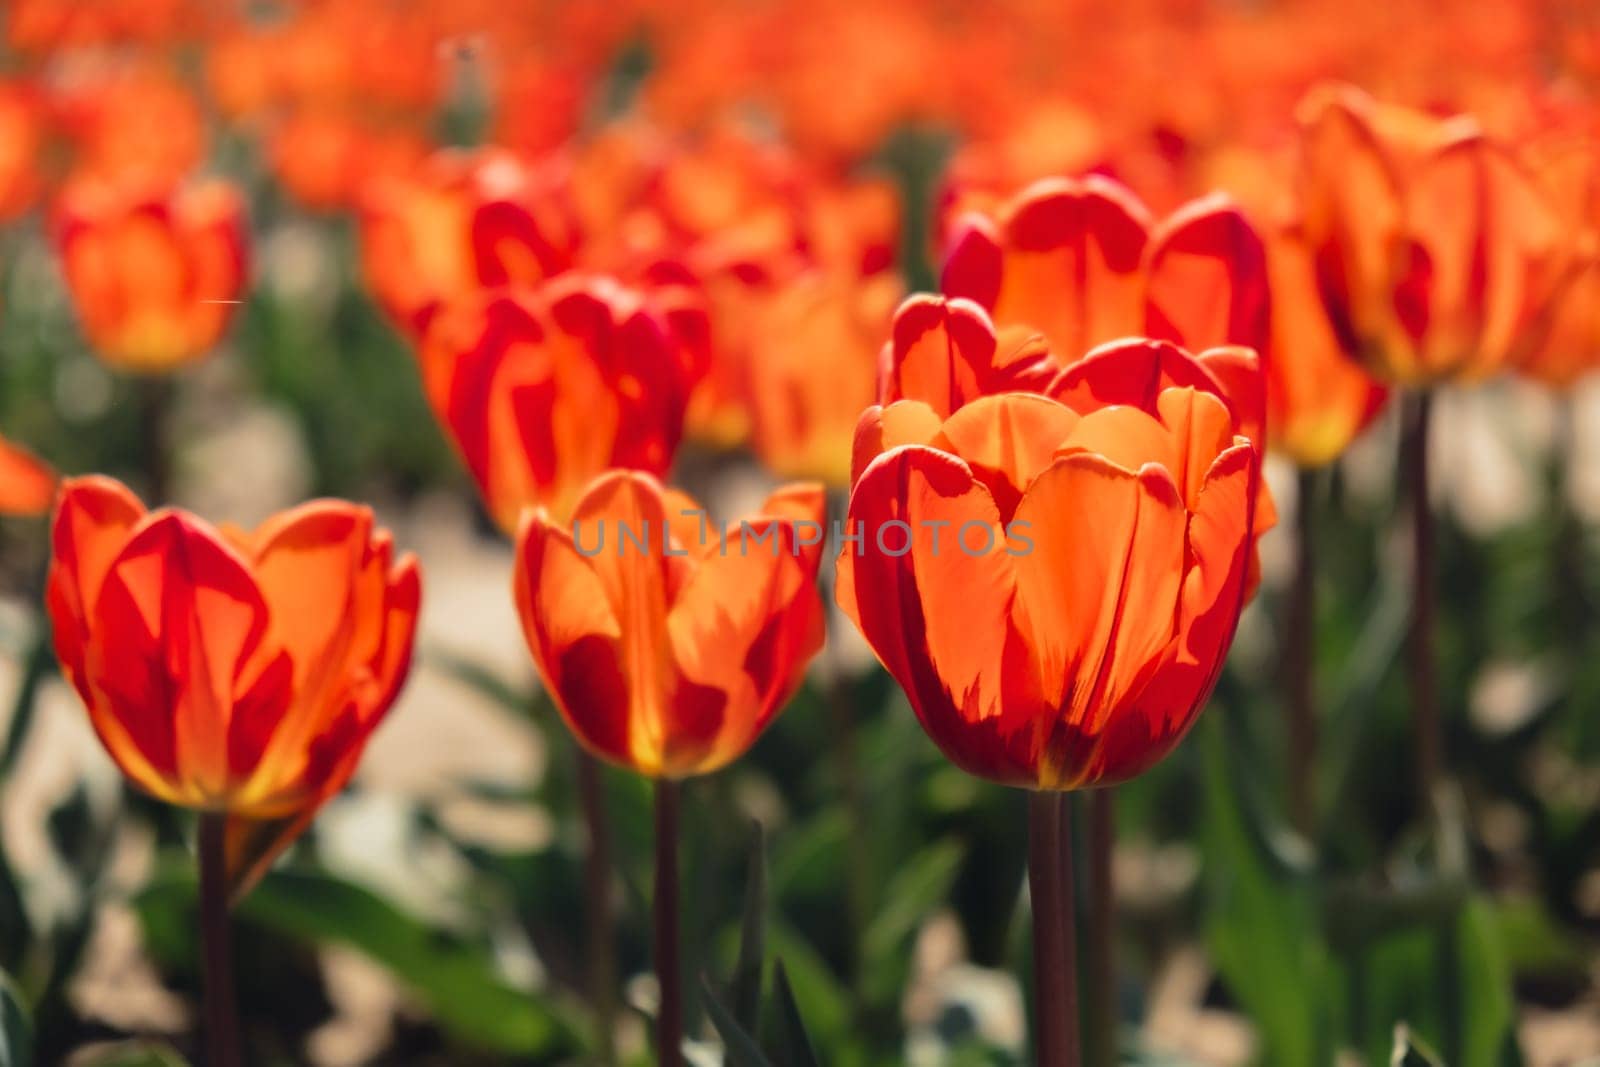 Tulip flowers blooming in the garden field landscape. Stripped tulips growing in flourish meadow sunny day Keukenhof. Beautiful spring garden with many red tulips outdoors. Blooming floral park in sunrise light. Natural floral pattern blowing in wind in spring